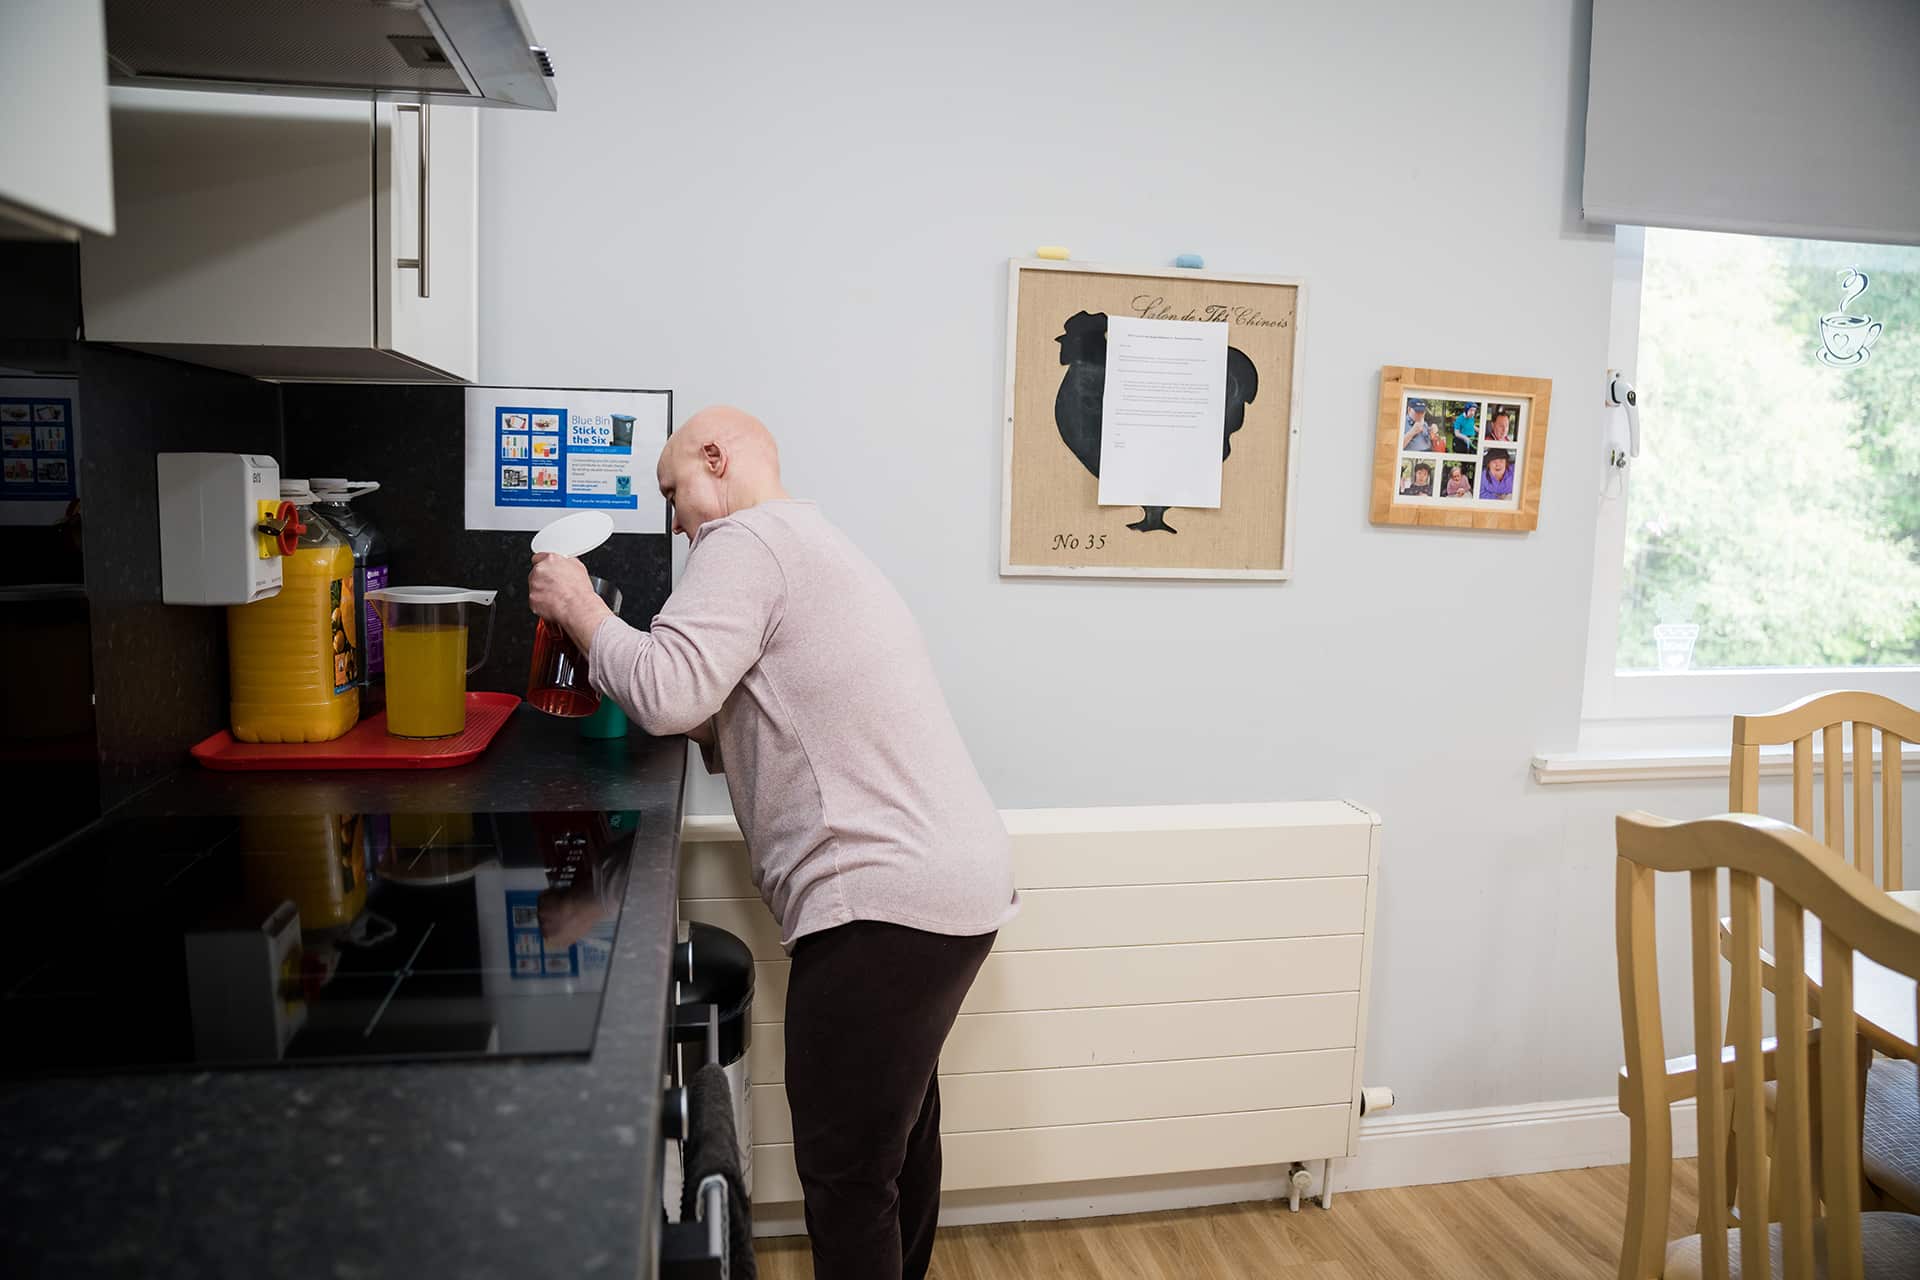 The communal kitchen in the learning disability unit of Muirton House Care Home in Blairgowrie supports independent living.